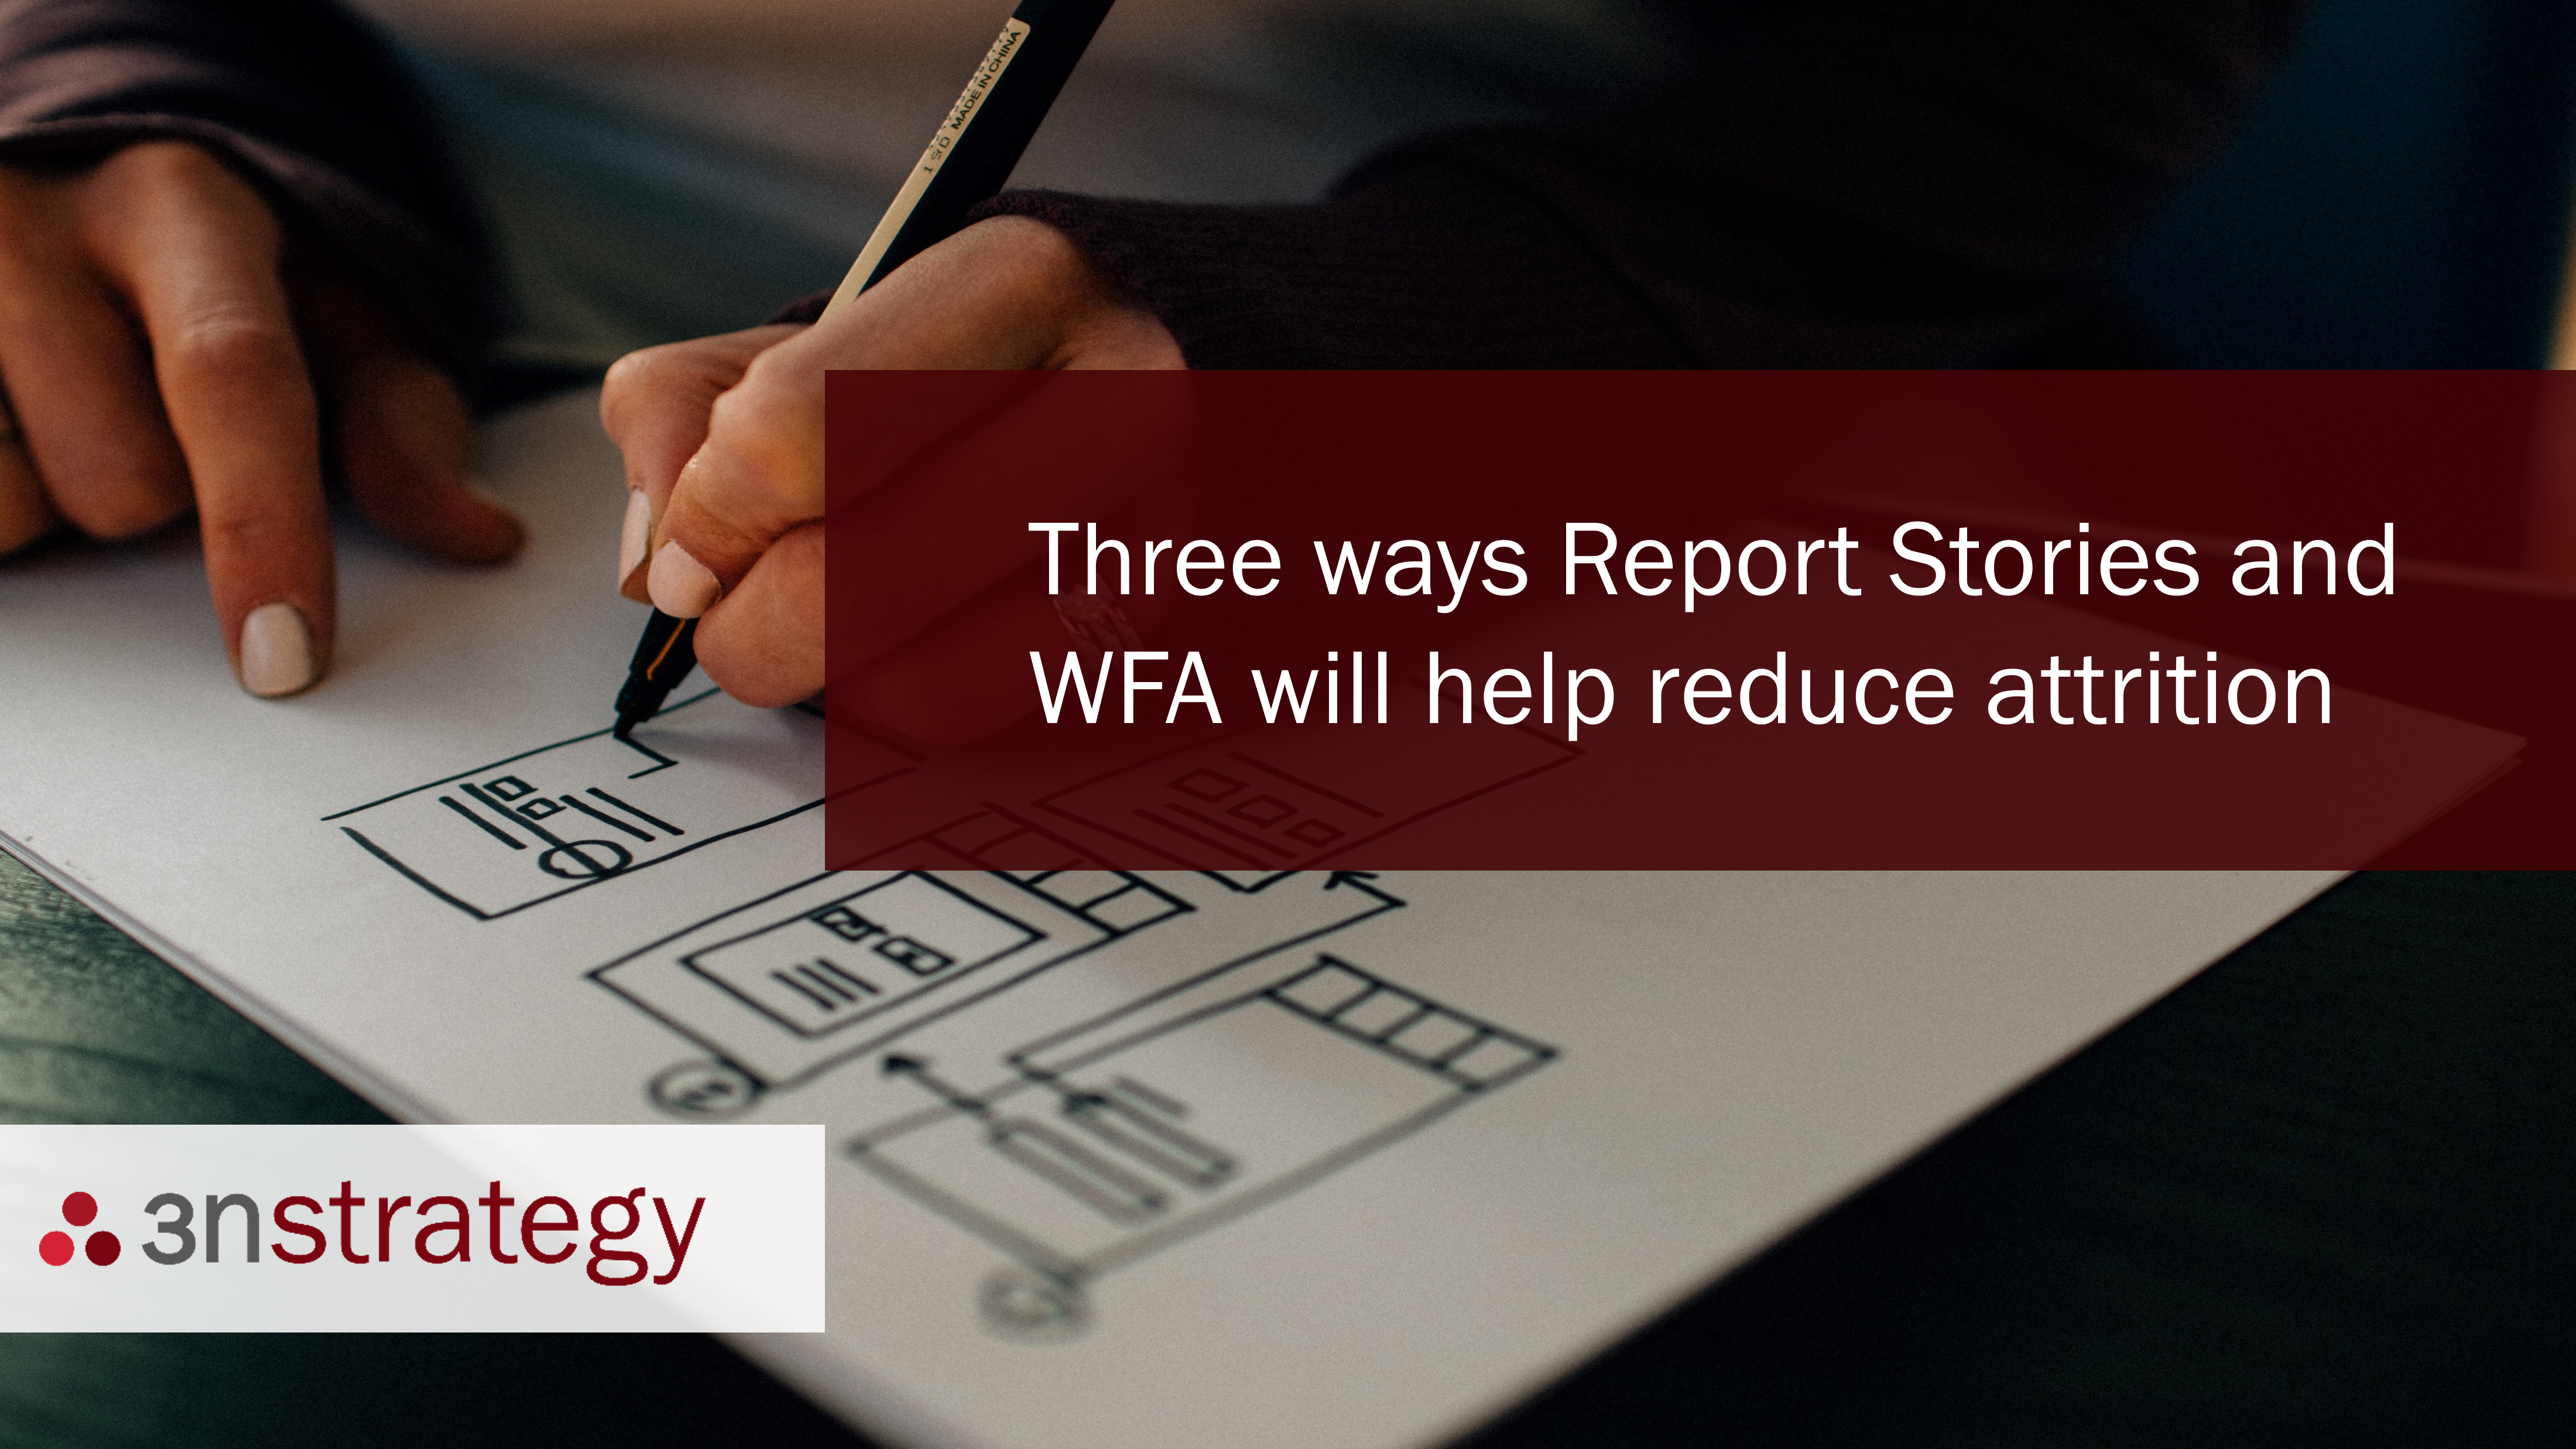 Three ways Report Stories and WFA will help reduce attrition